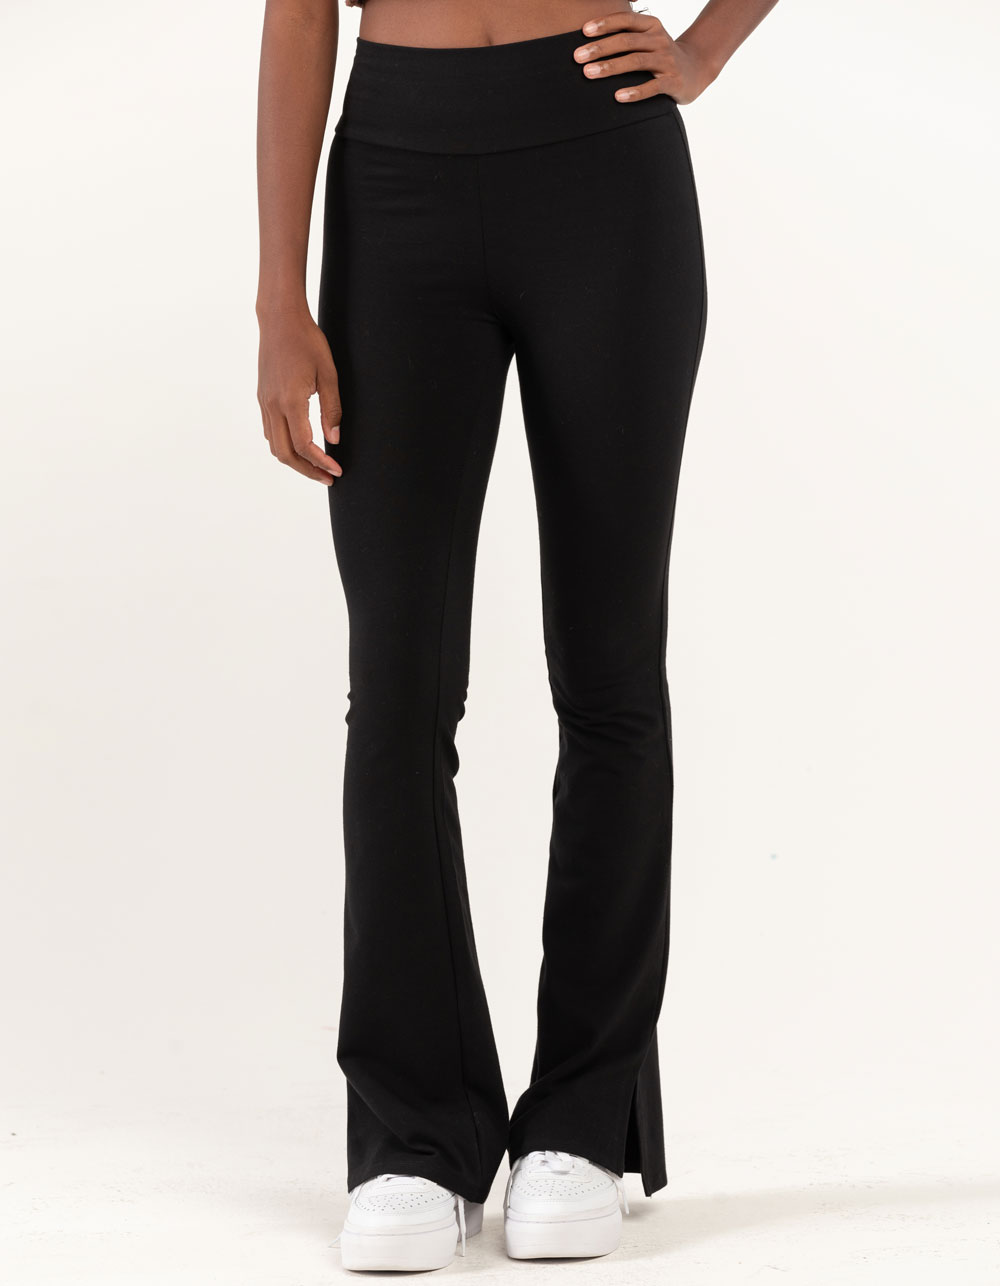 Black Flare Yoga Pant with Side Pockets - The Humming Arrow Boutique